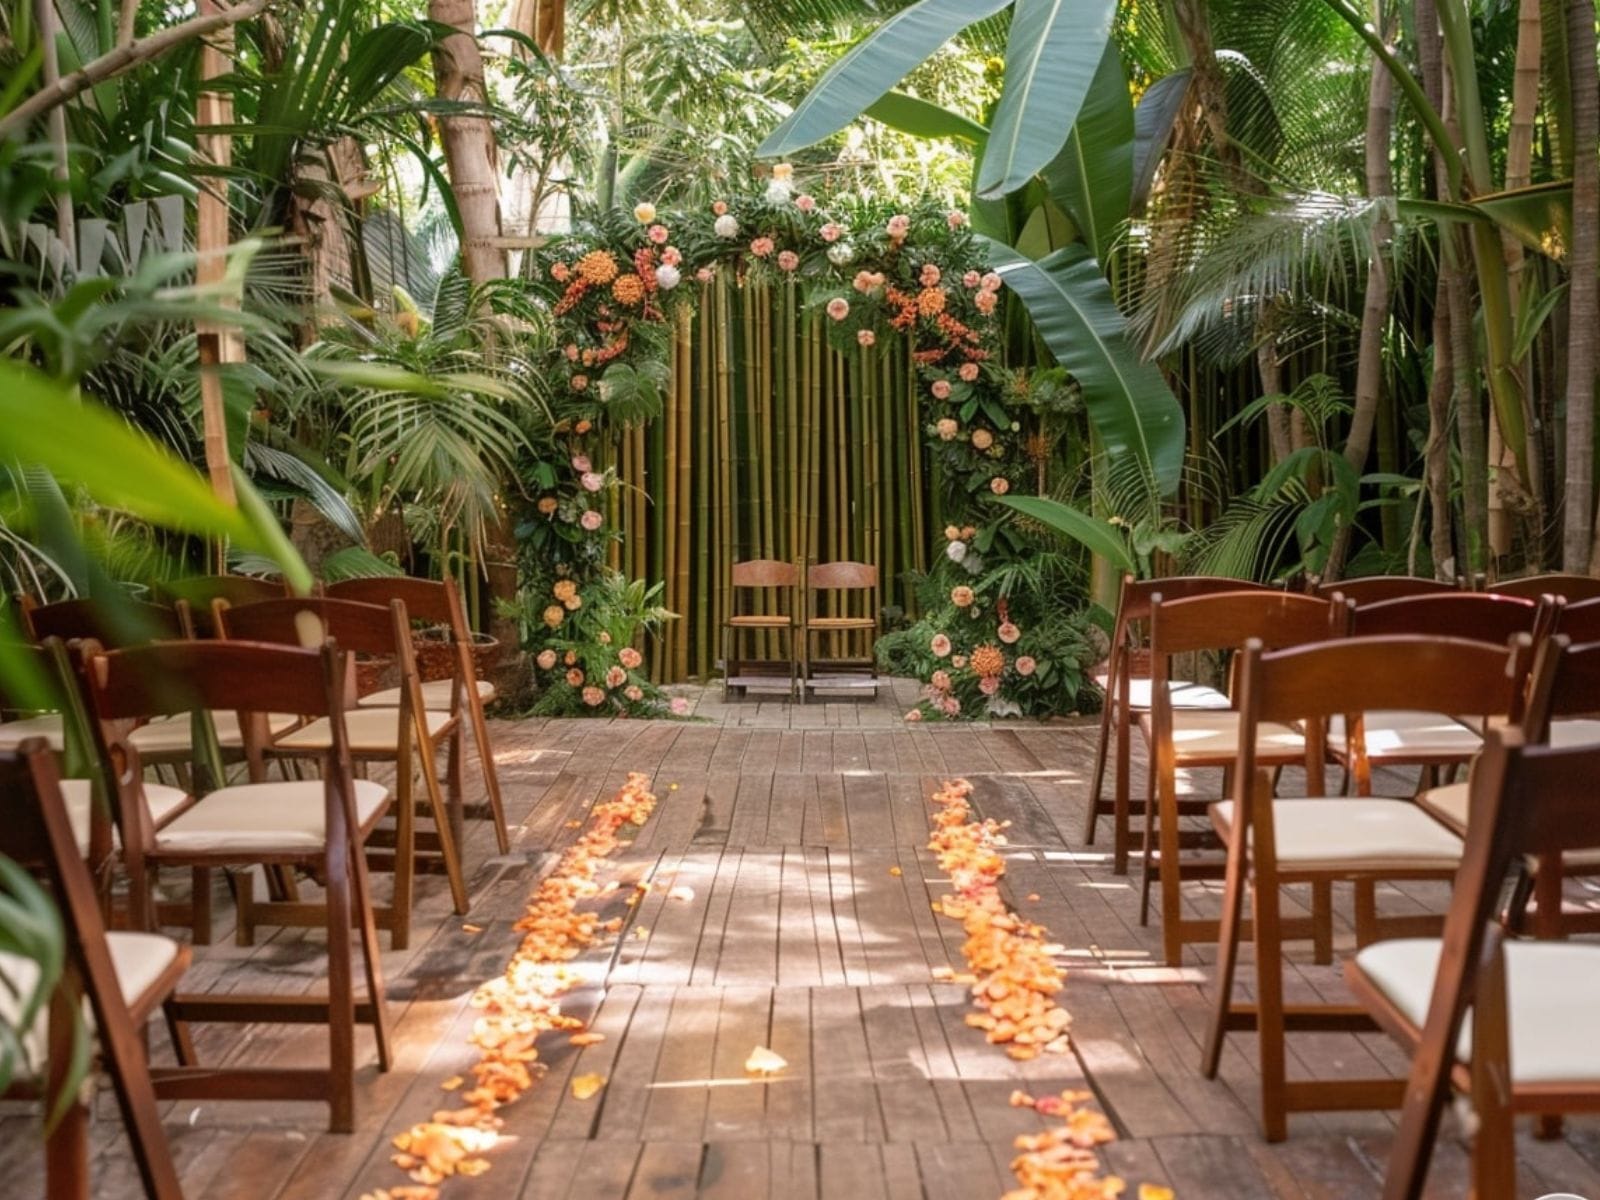 A tropical garden wedding setup with greenery and vibrant flowers